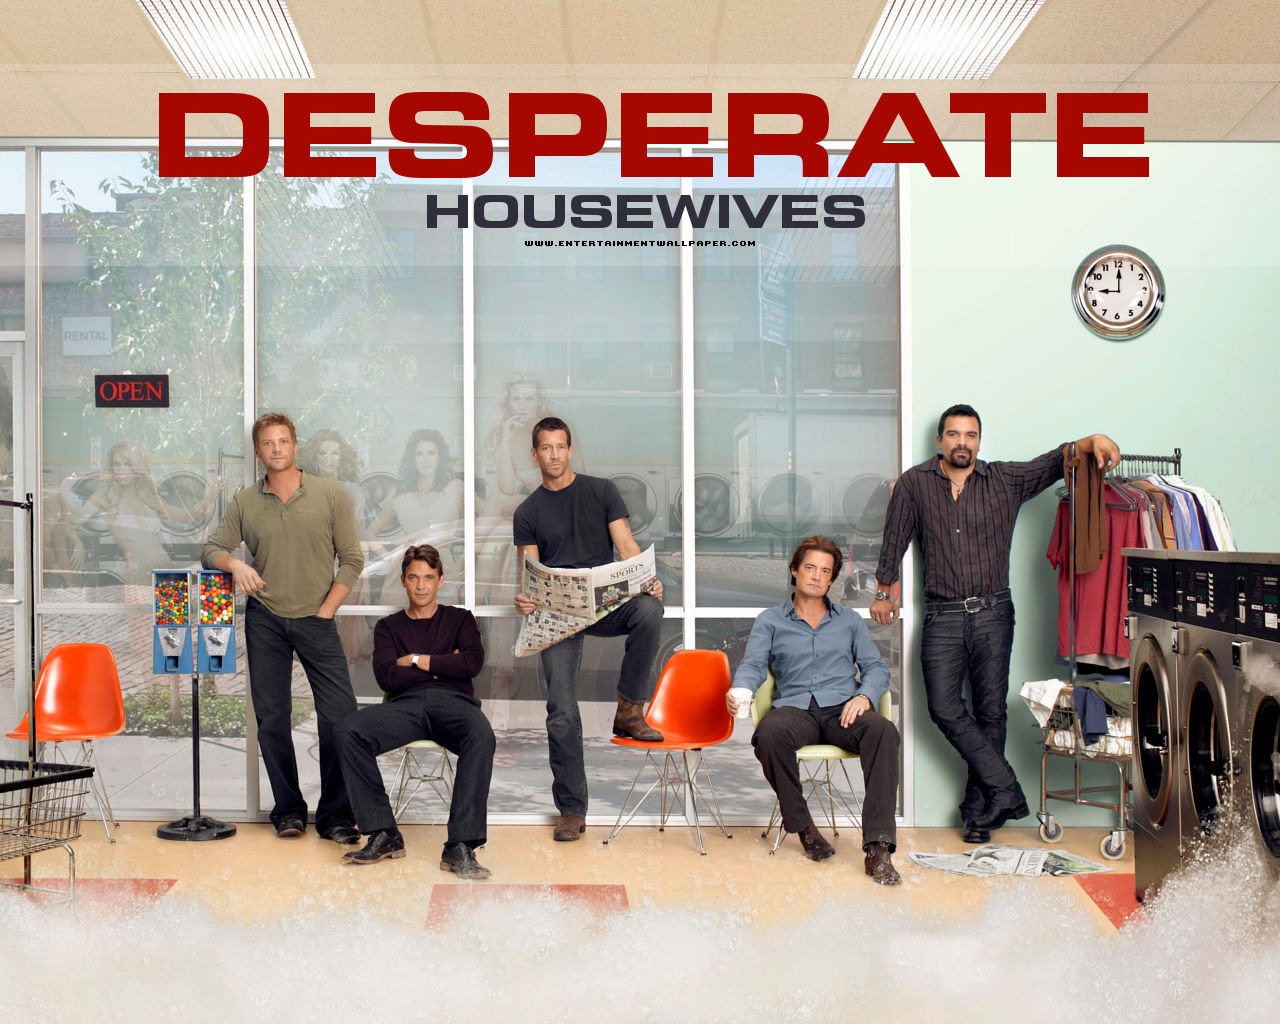 Desperate Housewives 絕望的主婦 #38 - 1280x1024